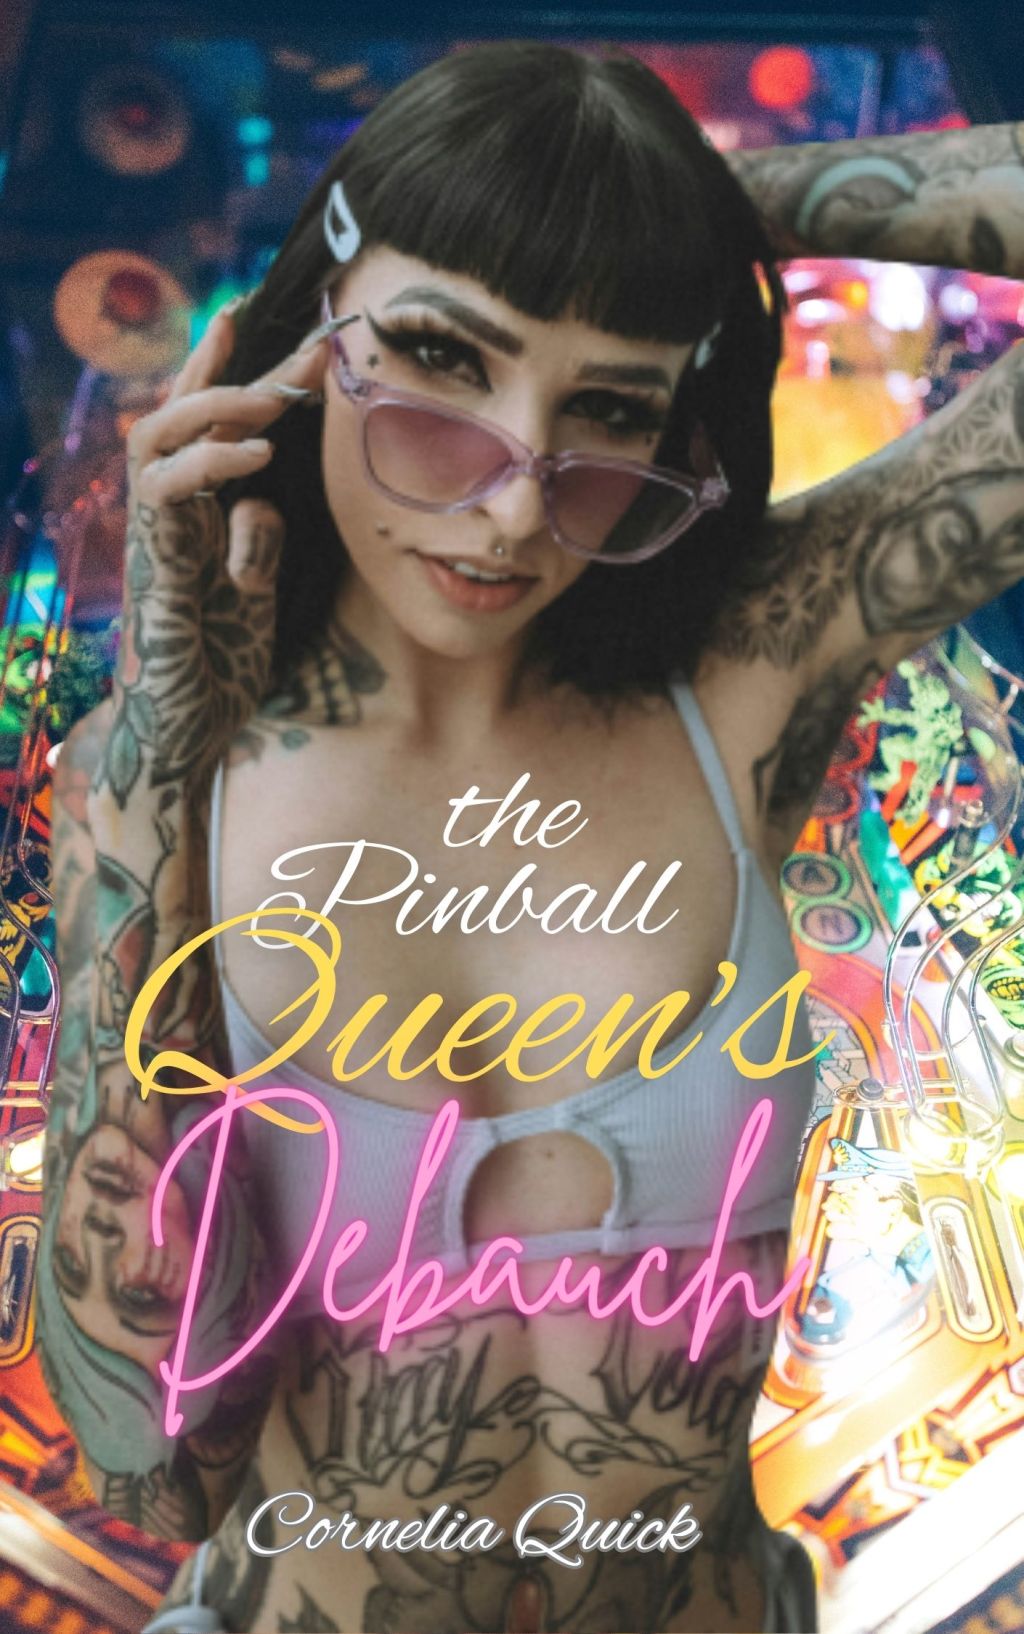 Celebrating a year of “The Pinball Queen’s Debauch”!